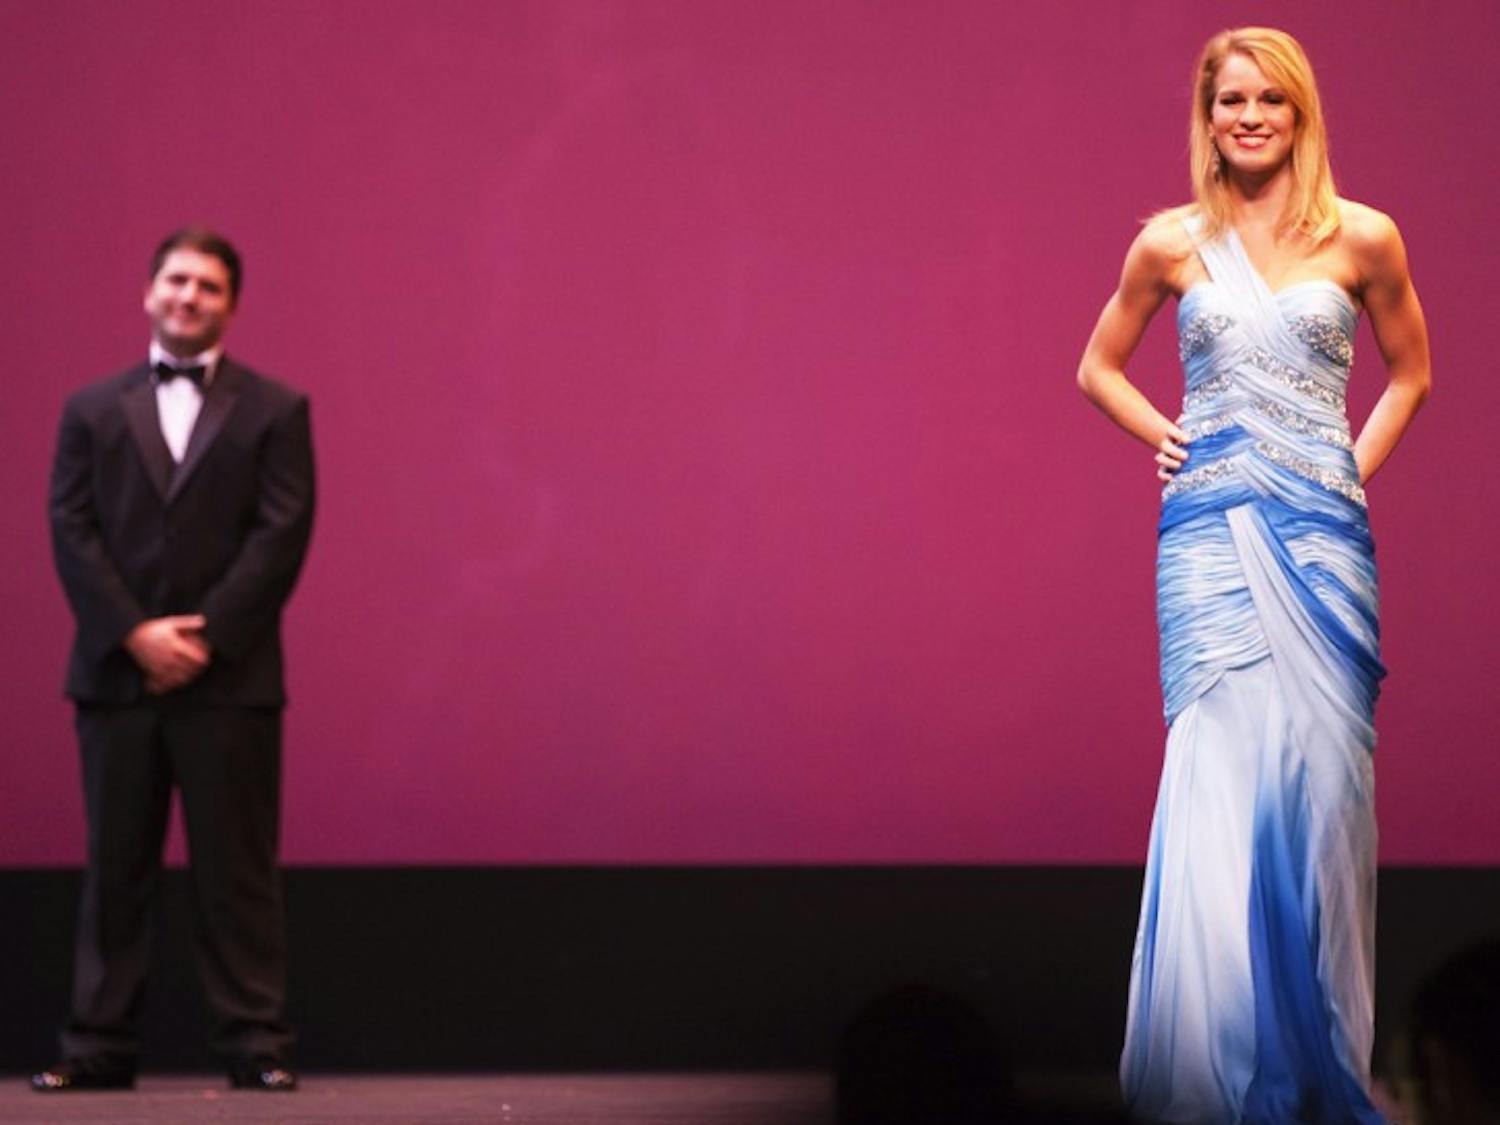 Homecoming finalist contestants Andy Schein, 21, and Cecelia Hardwick, 21, smile at the crowd at the UF Homecoming Pageant 2012 at the Phillips Center for the Performing Arts on Monday night.